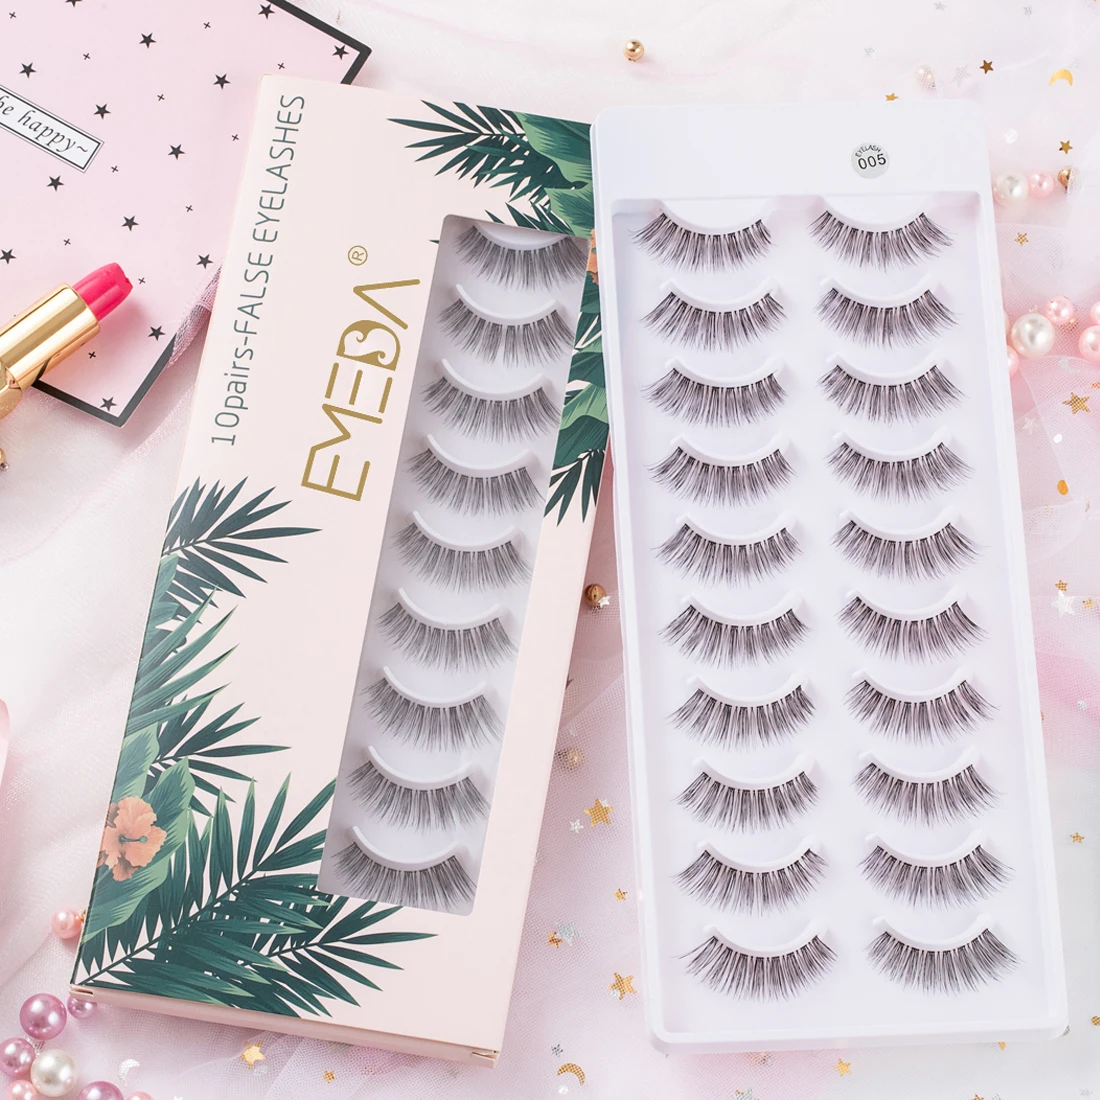 

EMEDA 002 faux mink lashes 5pairs/10pairs custom packaging box with lash glue and applicator In stock, Black